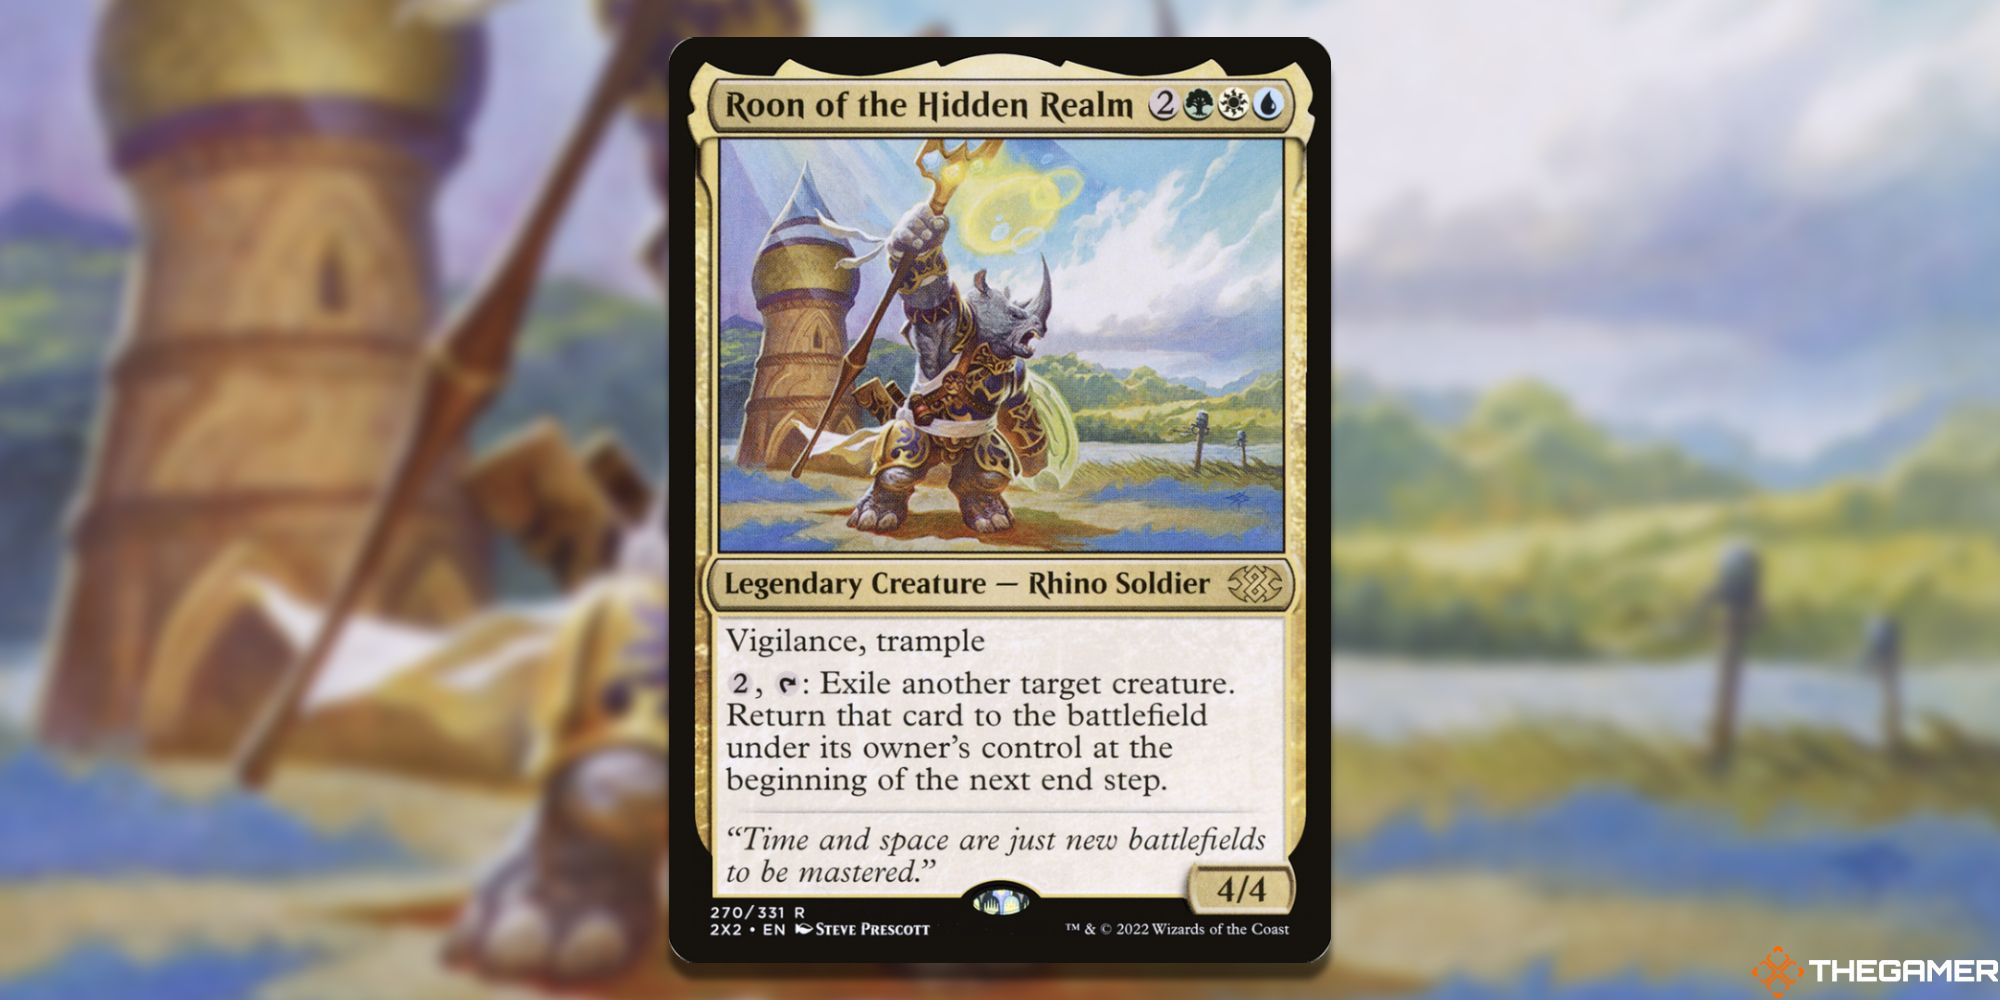 Image of the Roon of the Hidden Realm card in Magic: The Gathering, with art by Steve Prescott